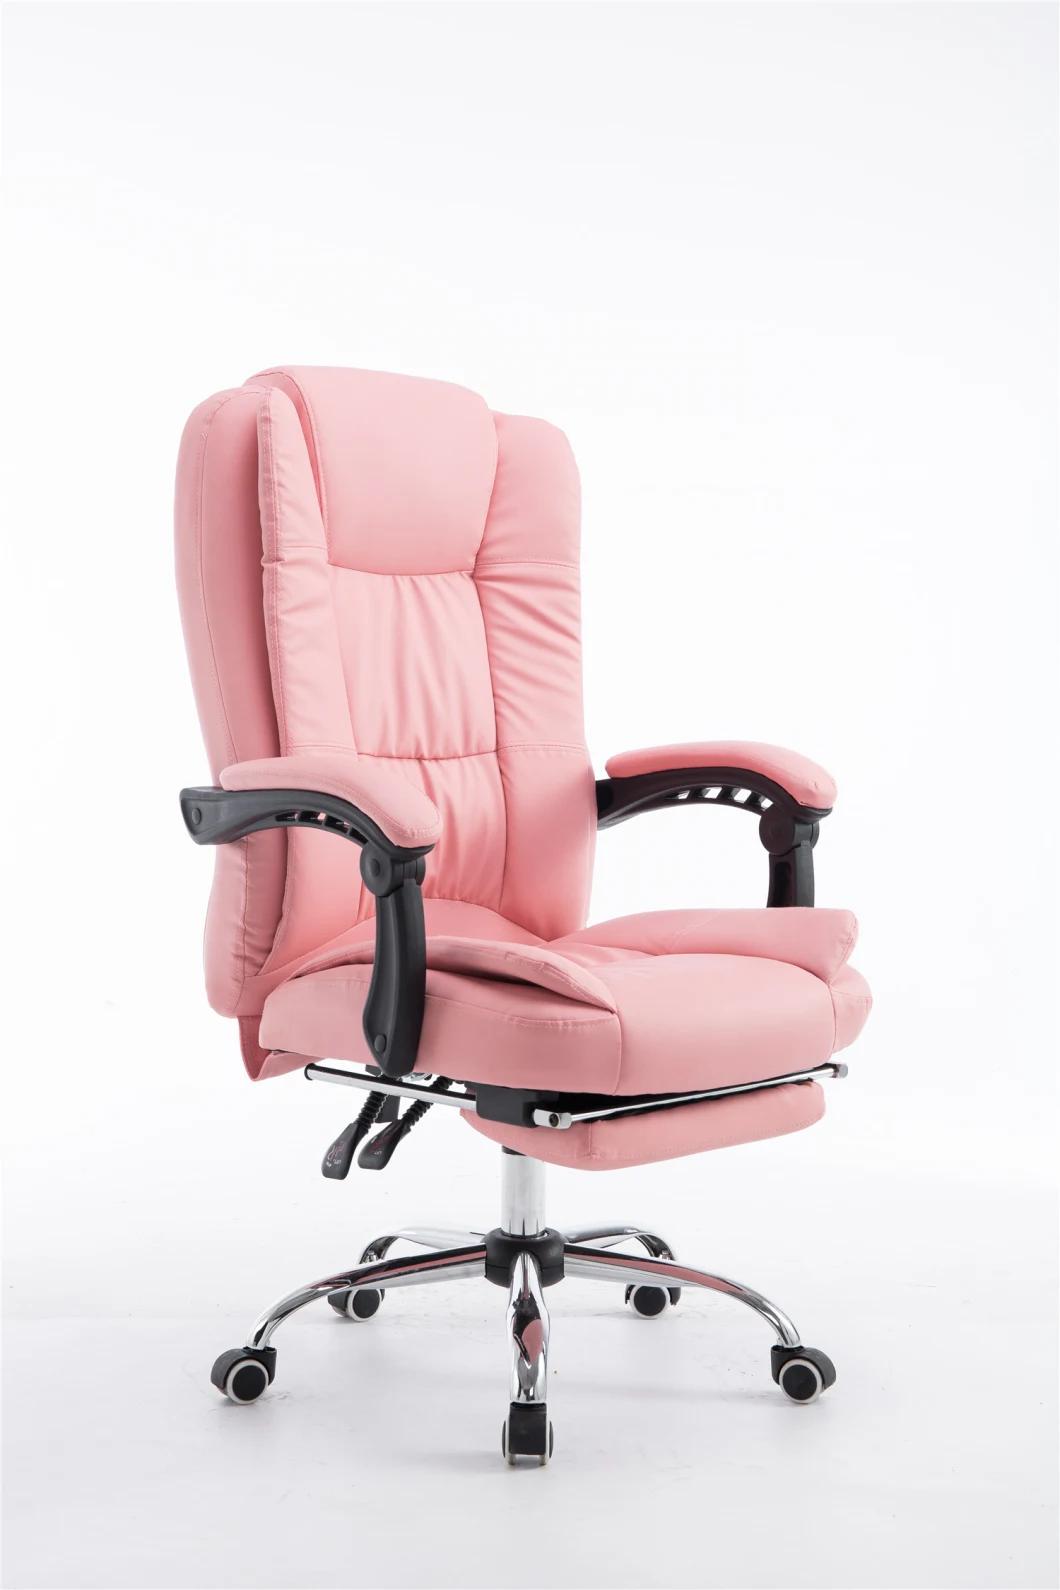 Luxury New Hot Selling High Back Pink PU Leather Ergonomic Boss Manager Computer Executive Ergonomic Office Chair for Lady